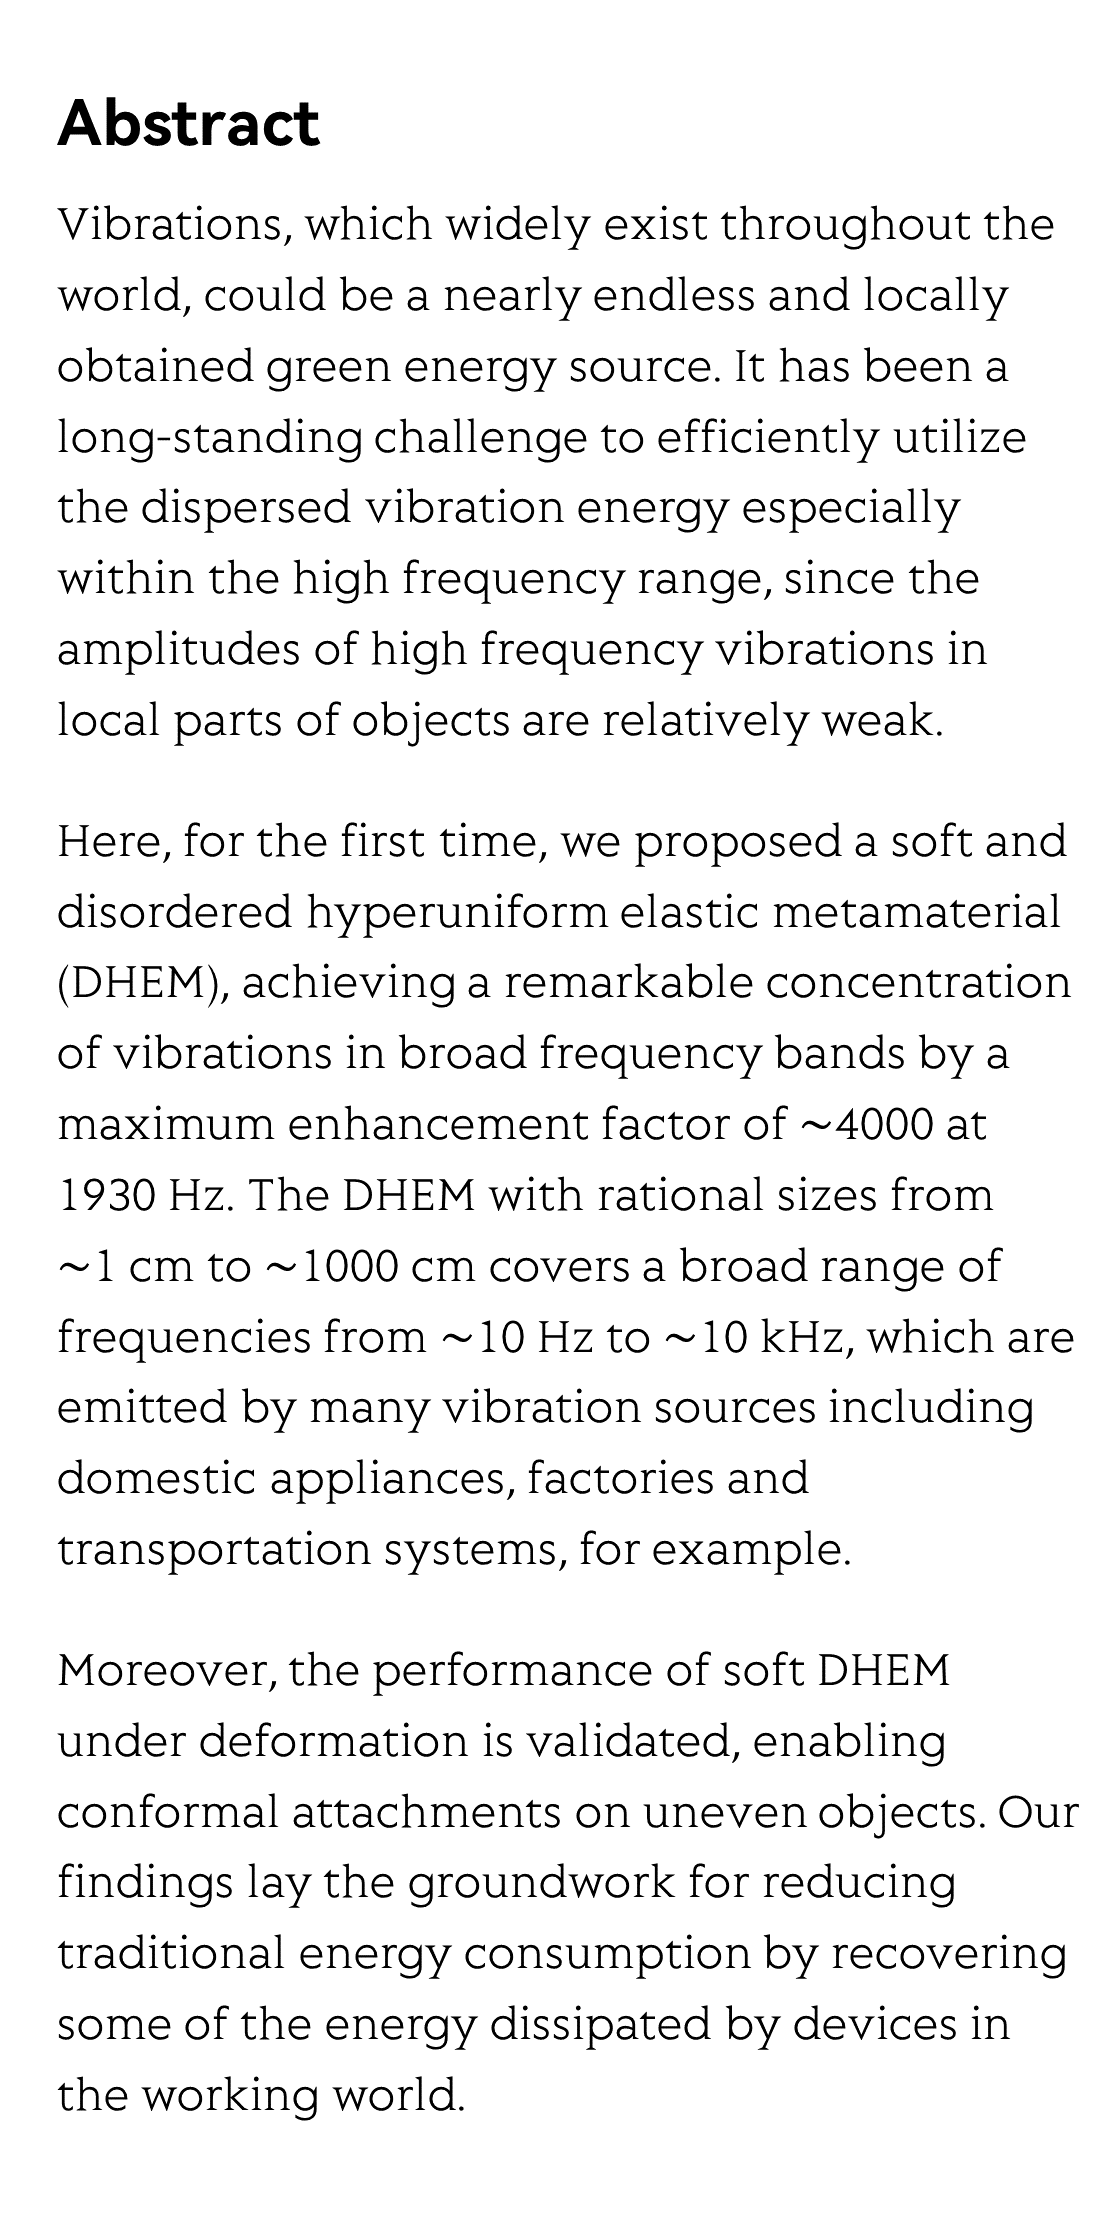 Soft and Disordered Hyperuniform Elastic Metamaterials for Highly Efficient Vibration Concentration_2